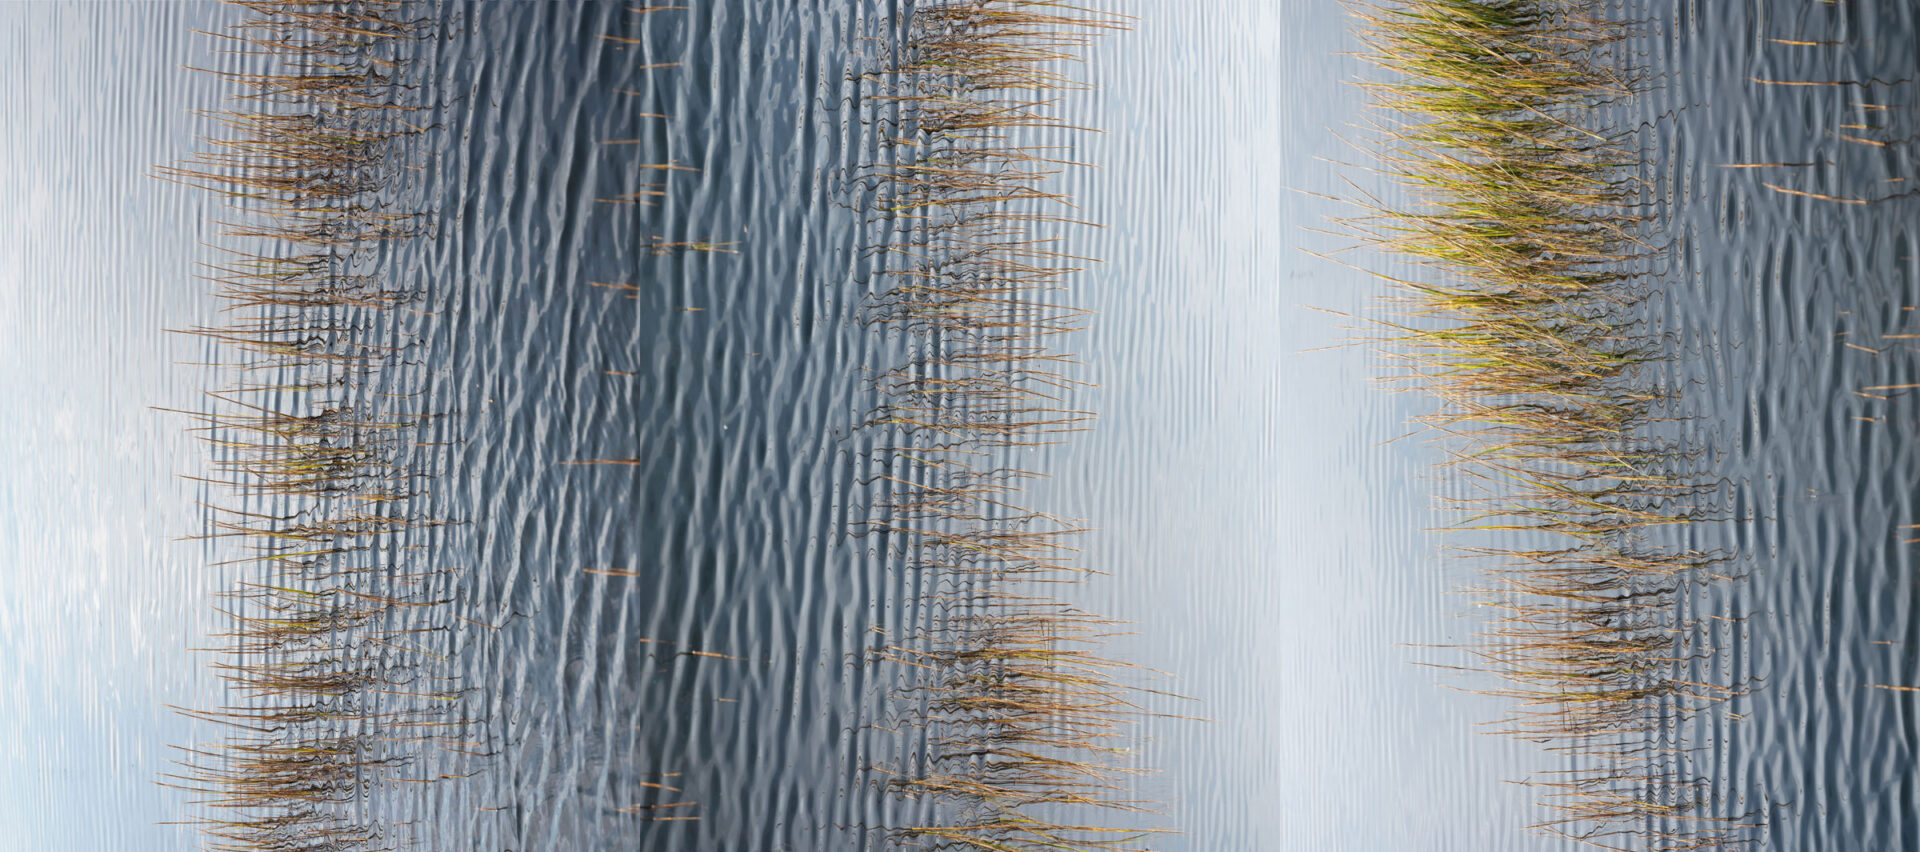 Infinity Dwells In Tranquility
Photograph Up to 80”H x 180”W